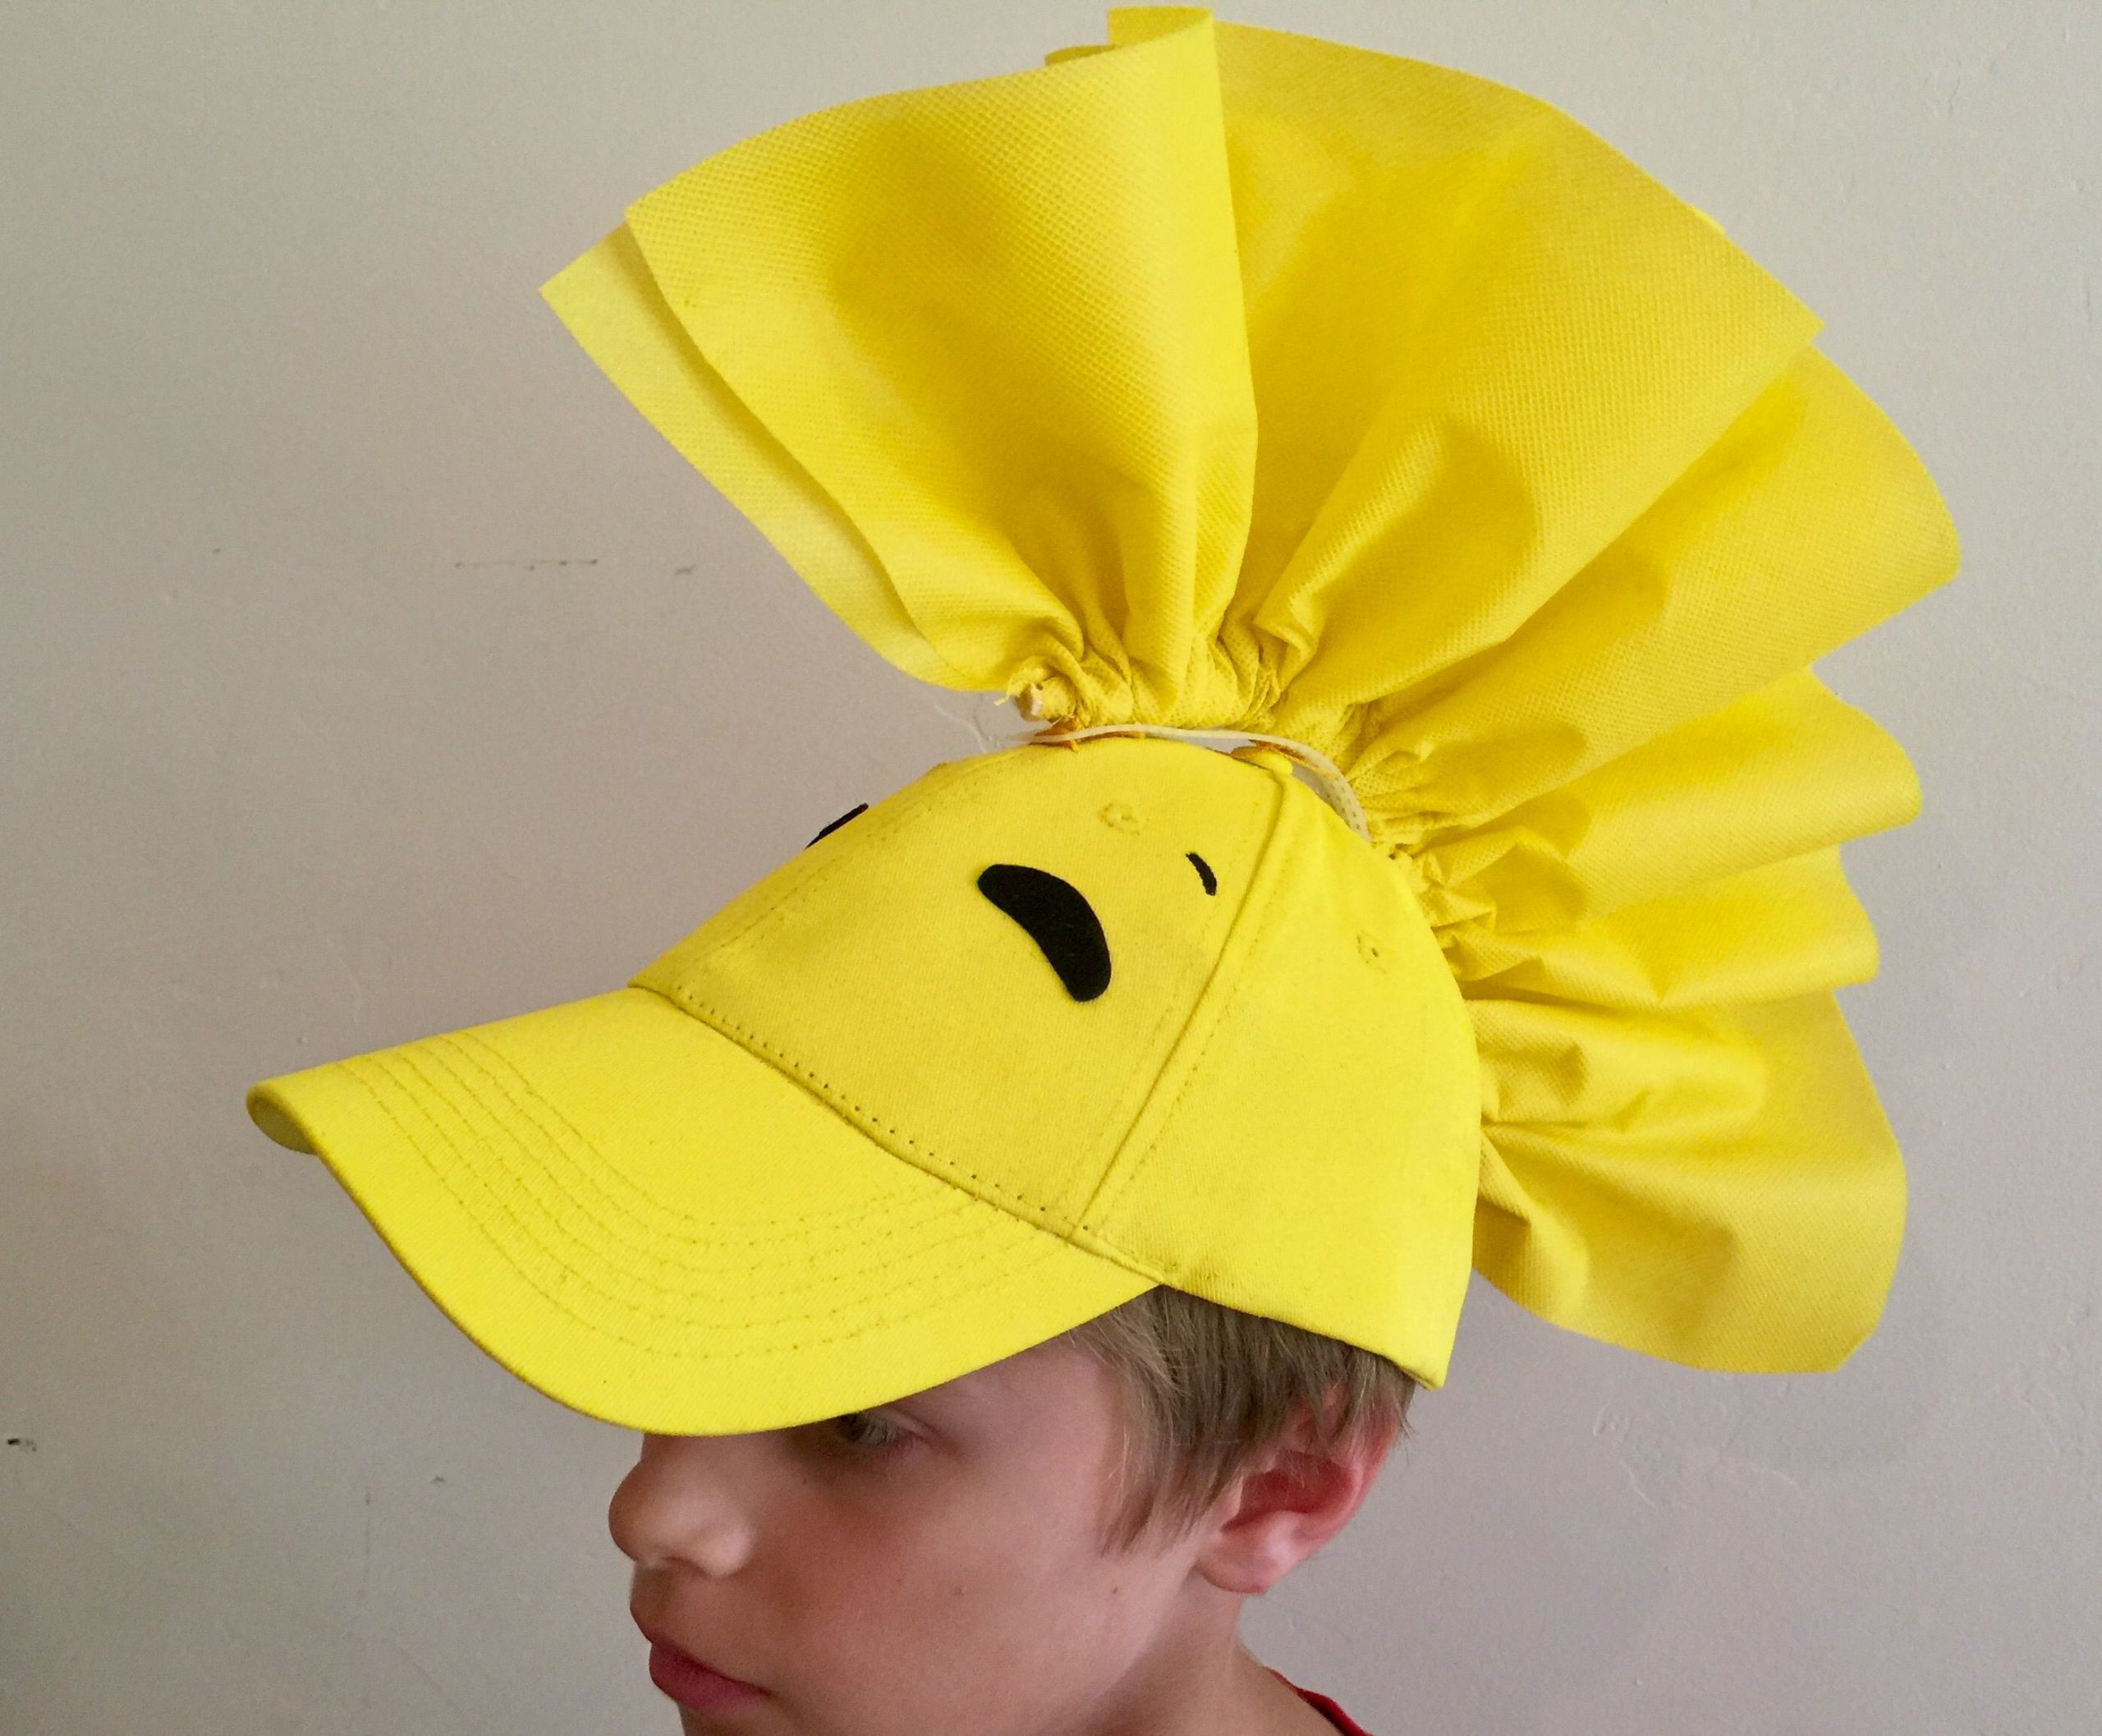 DIY Snoopy Costume
 Woodstock costume made from a yellow baseball cap and